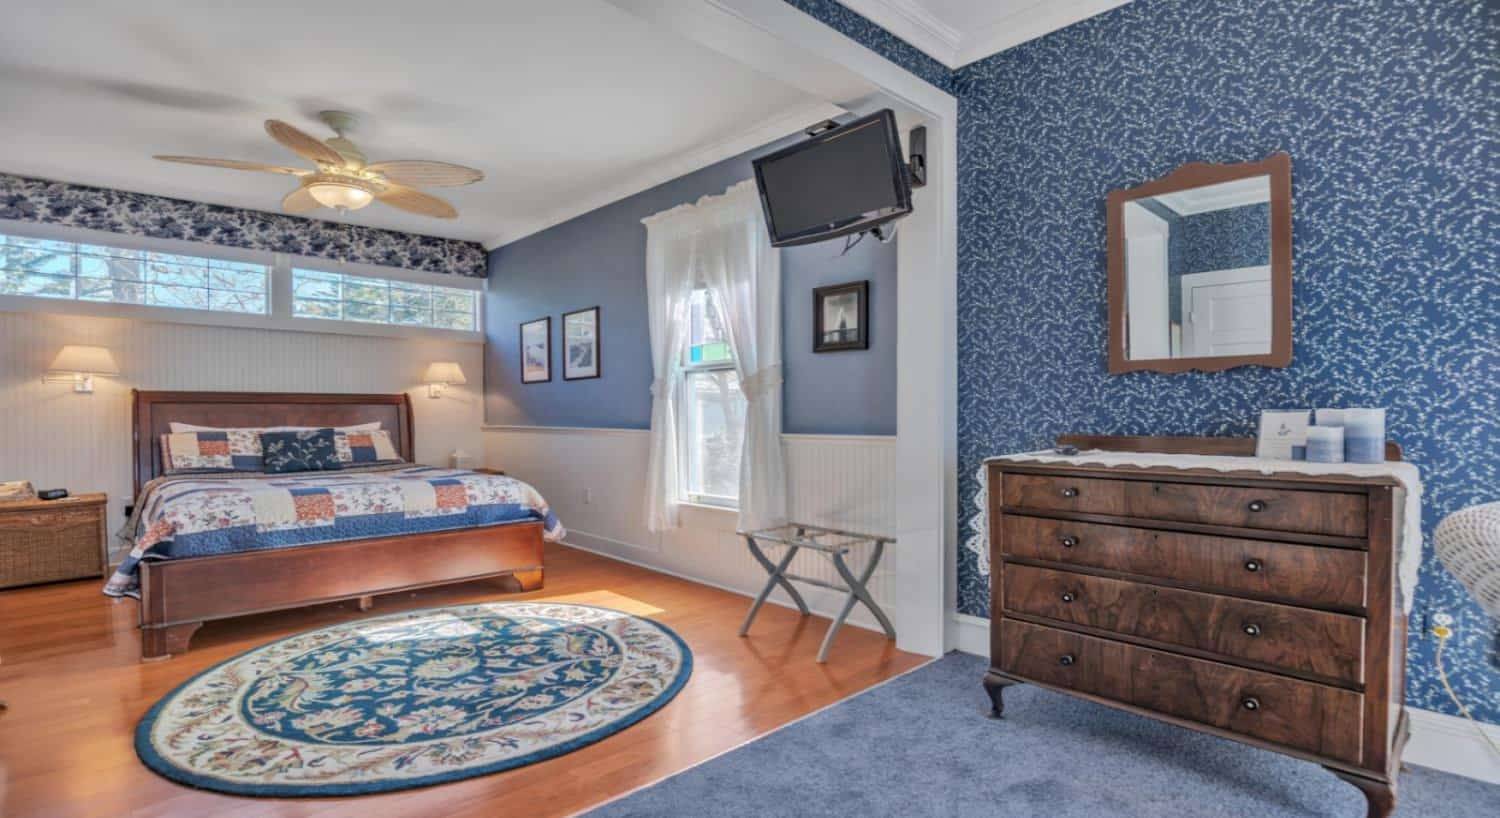 Bedroom with blue-gray walls, white wainscoting, hardwood flooring, dark wooden furniture, ceiling fan, and TV mounted on the wall